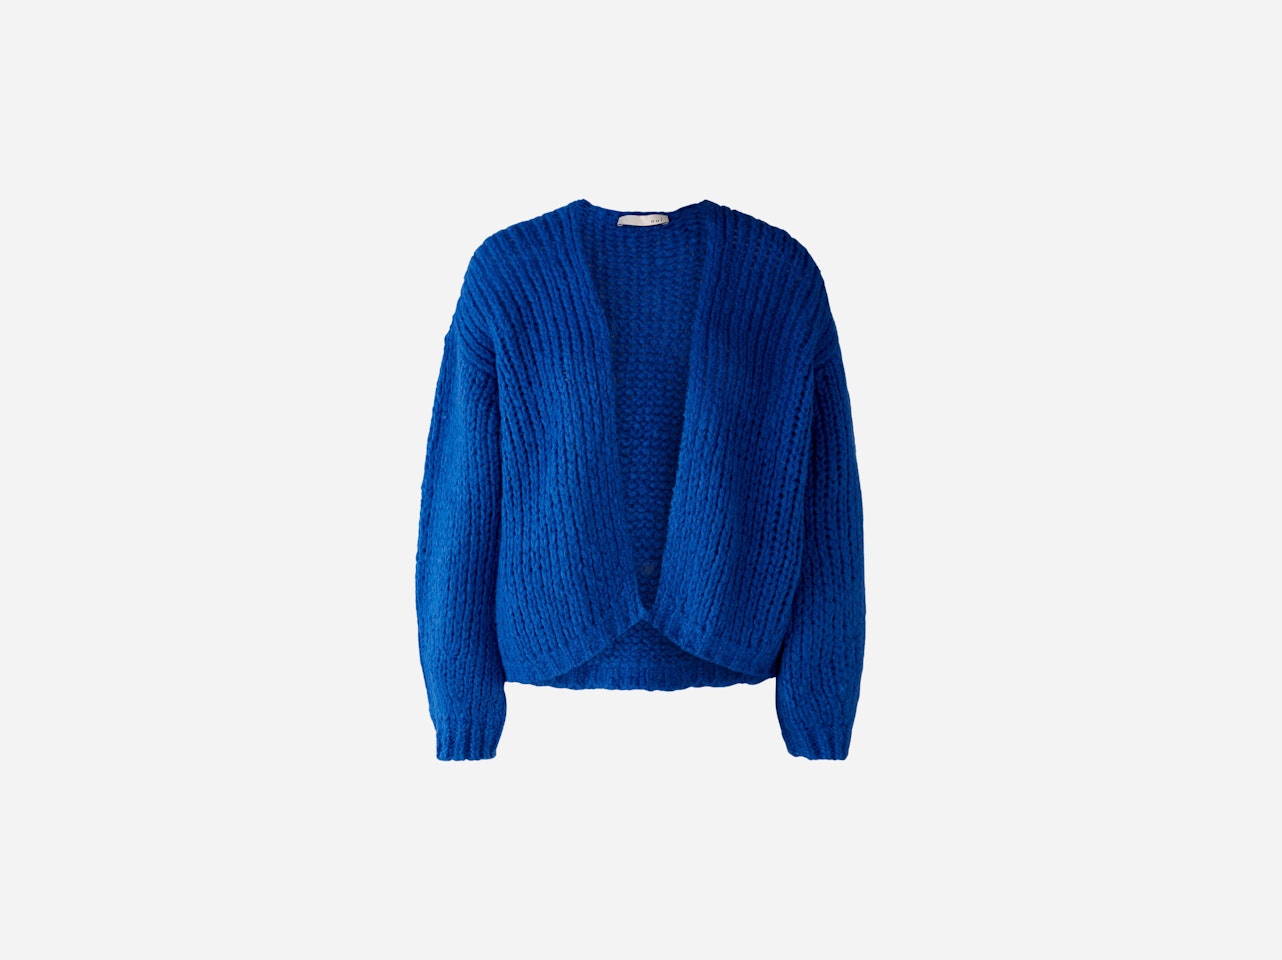 Bild 8 von Cardigan with wool and mohair content in blue lolite | Oui